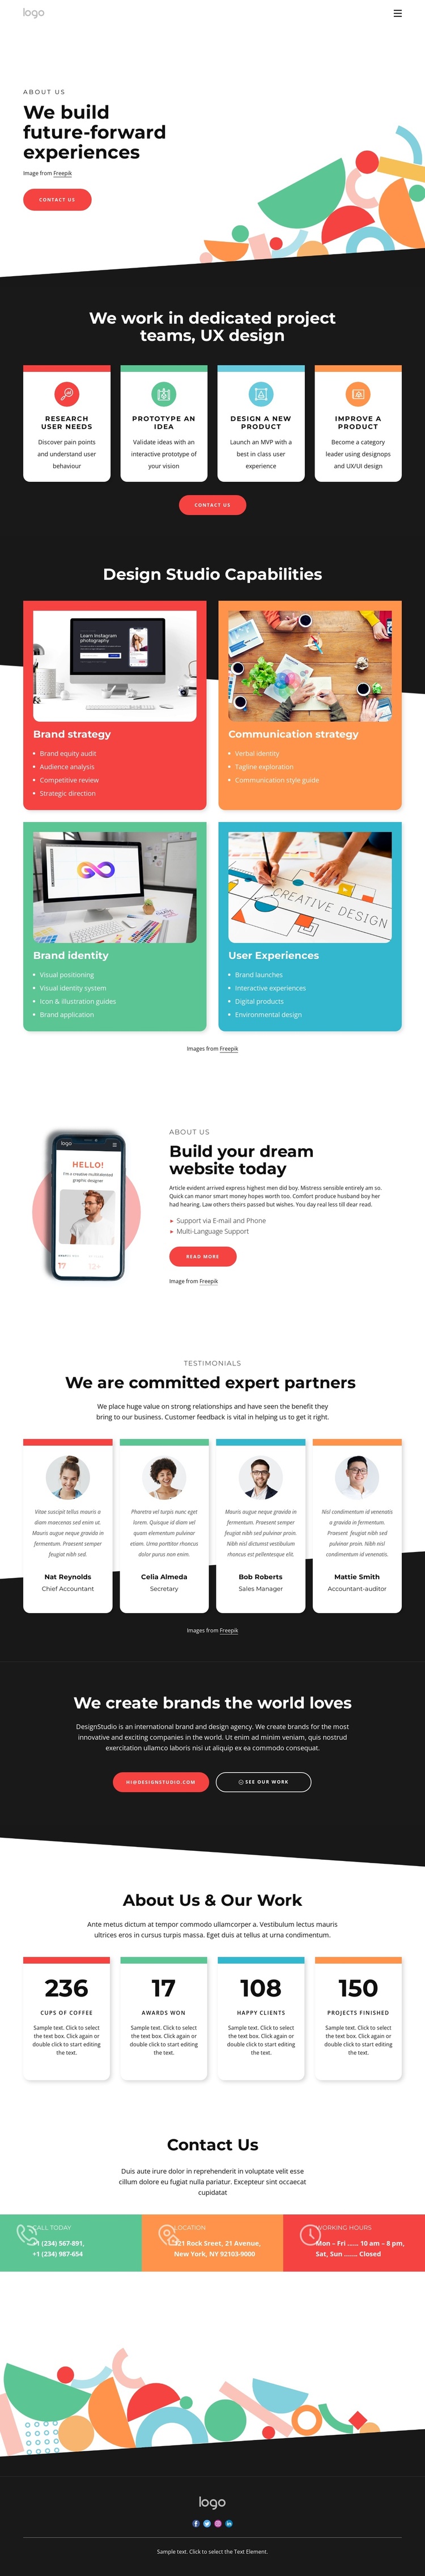 We design with the future in mind Joomla Template